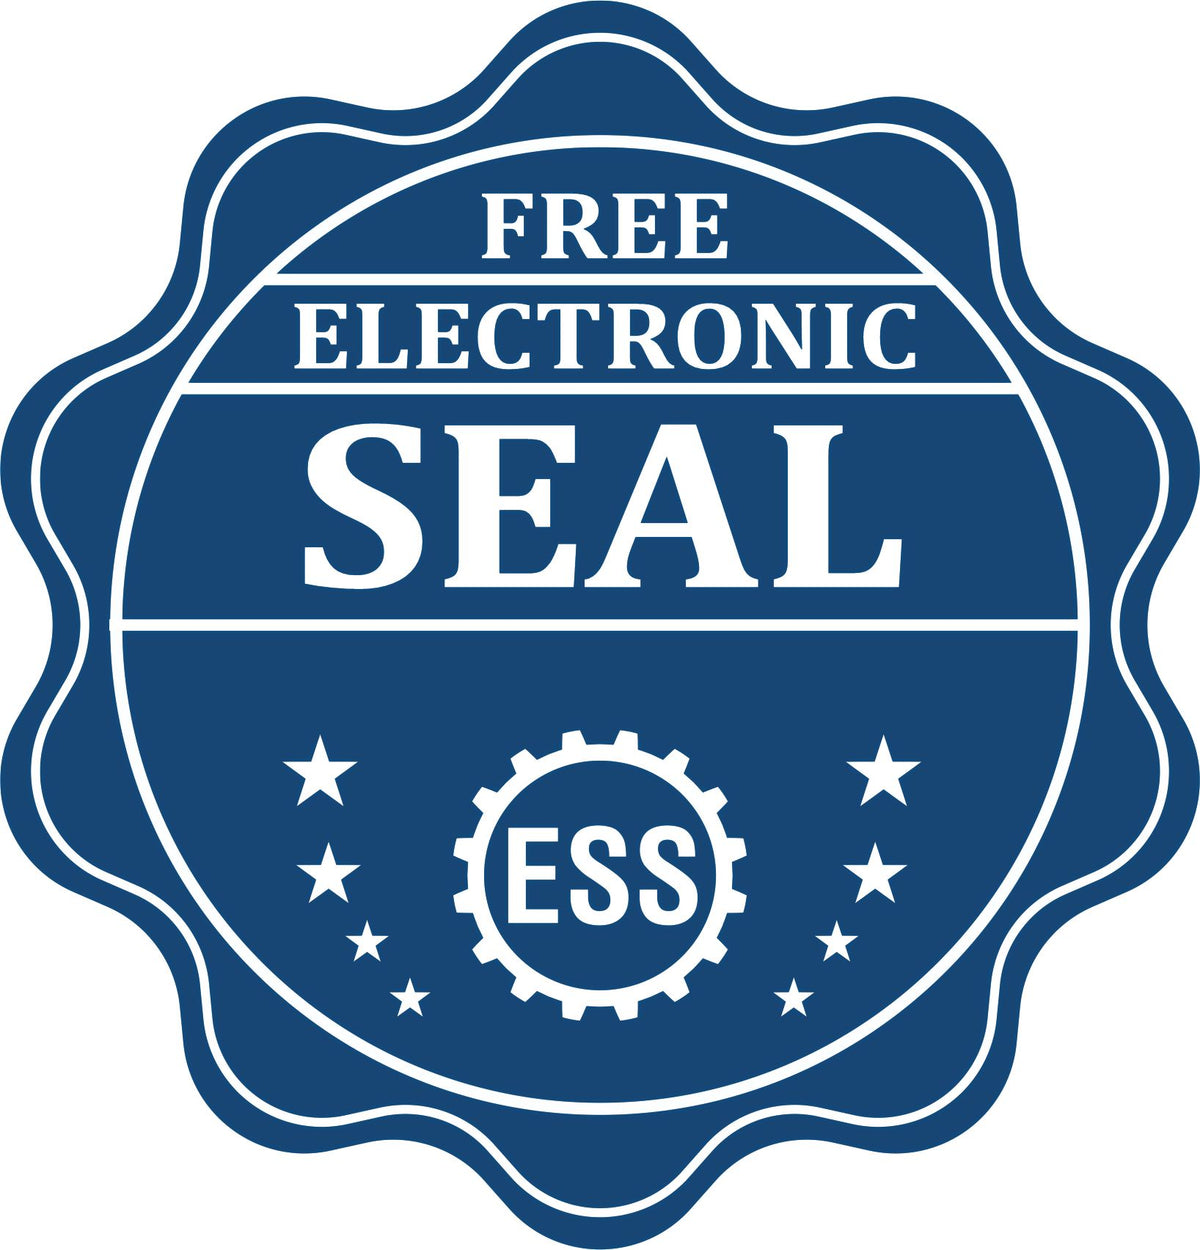 A badge showing a free electronic seal for the Slim Pre-Inked Rectangular Notary Stamp for Georgia with stars and the ESS gear on the emblem.